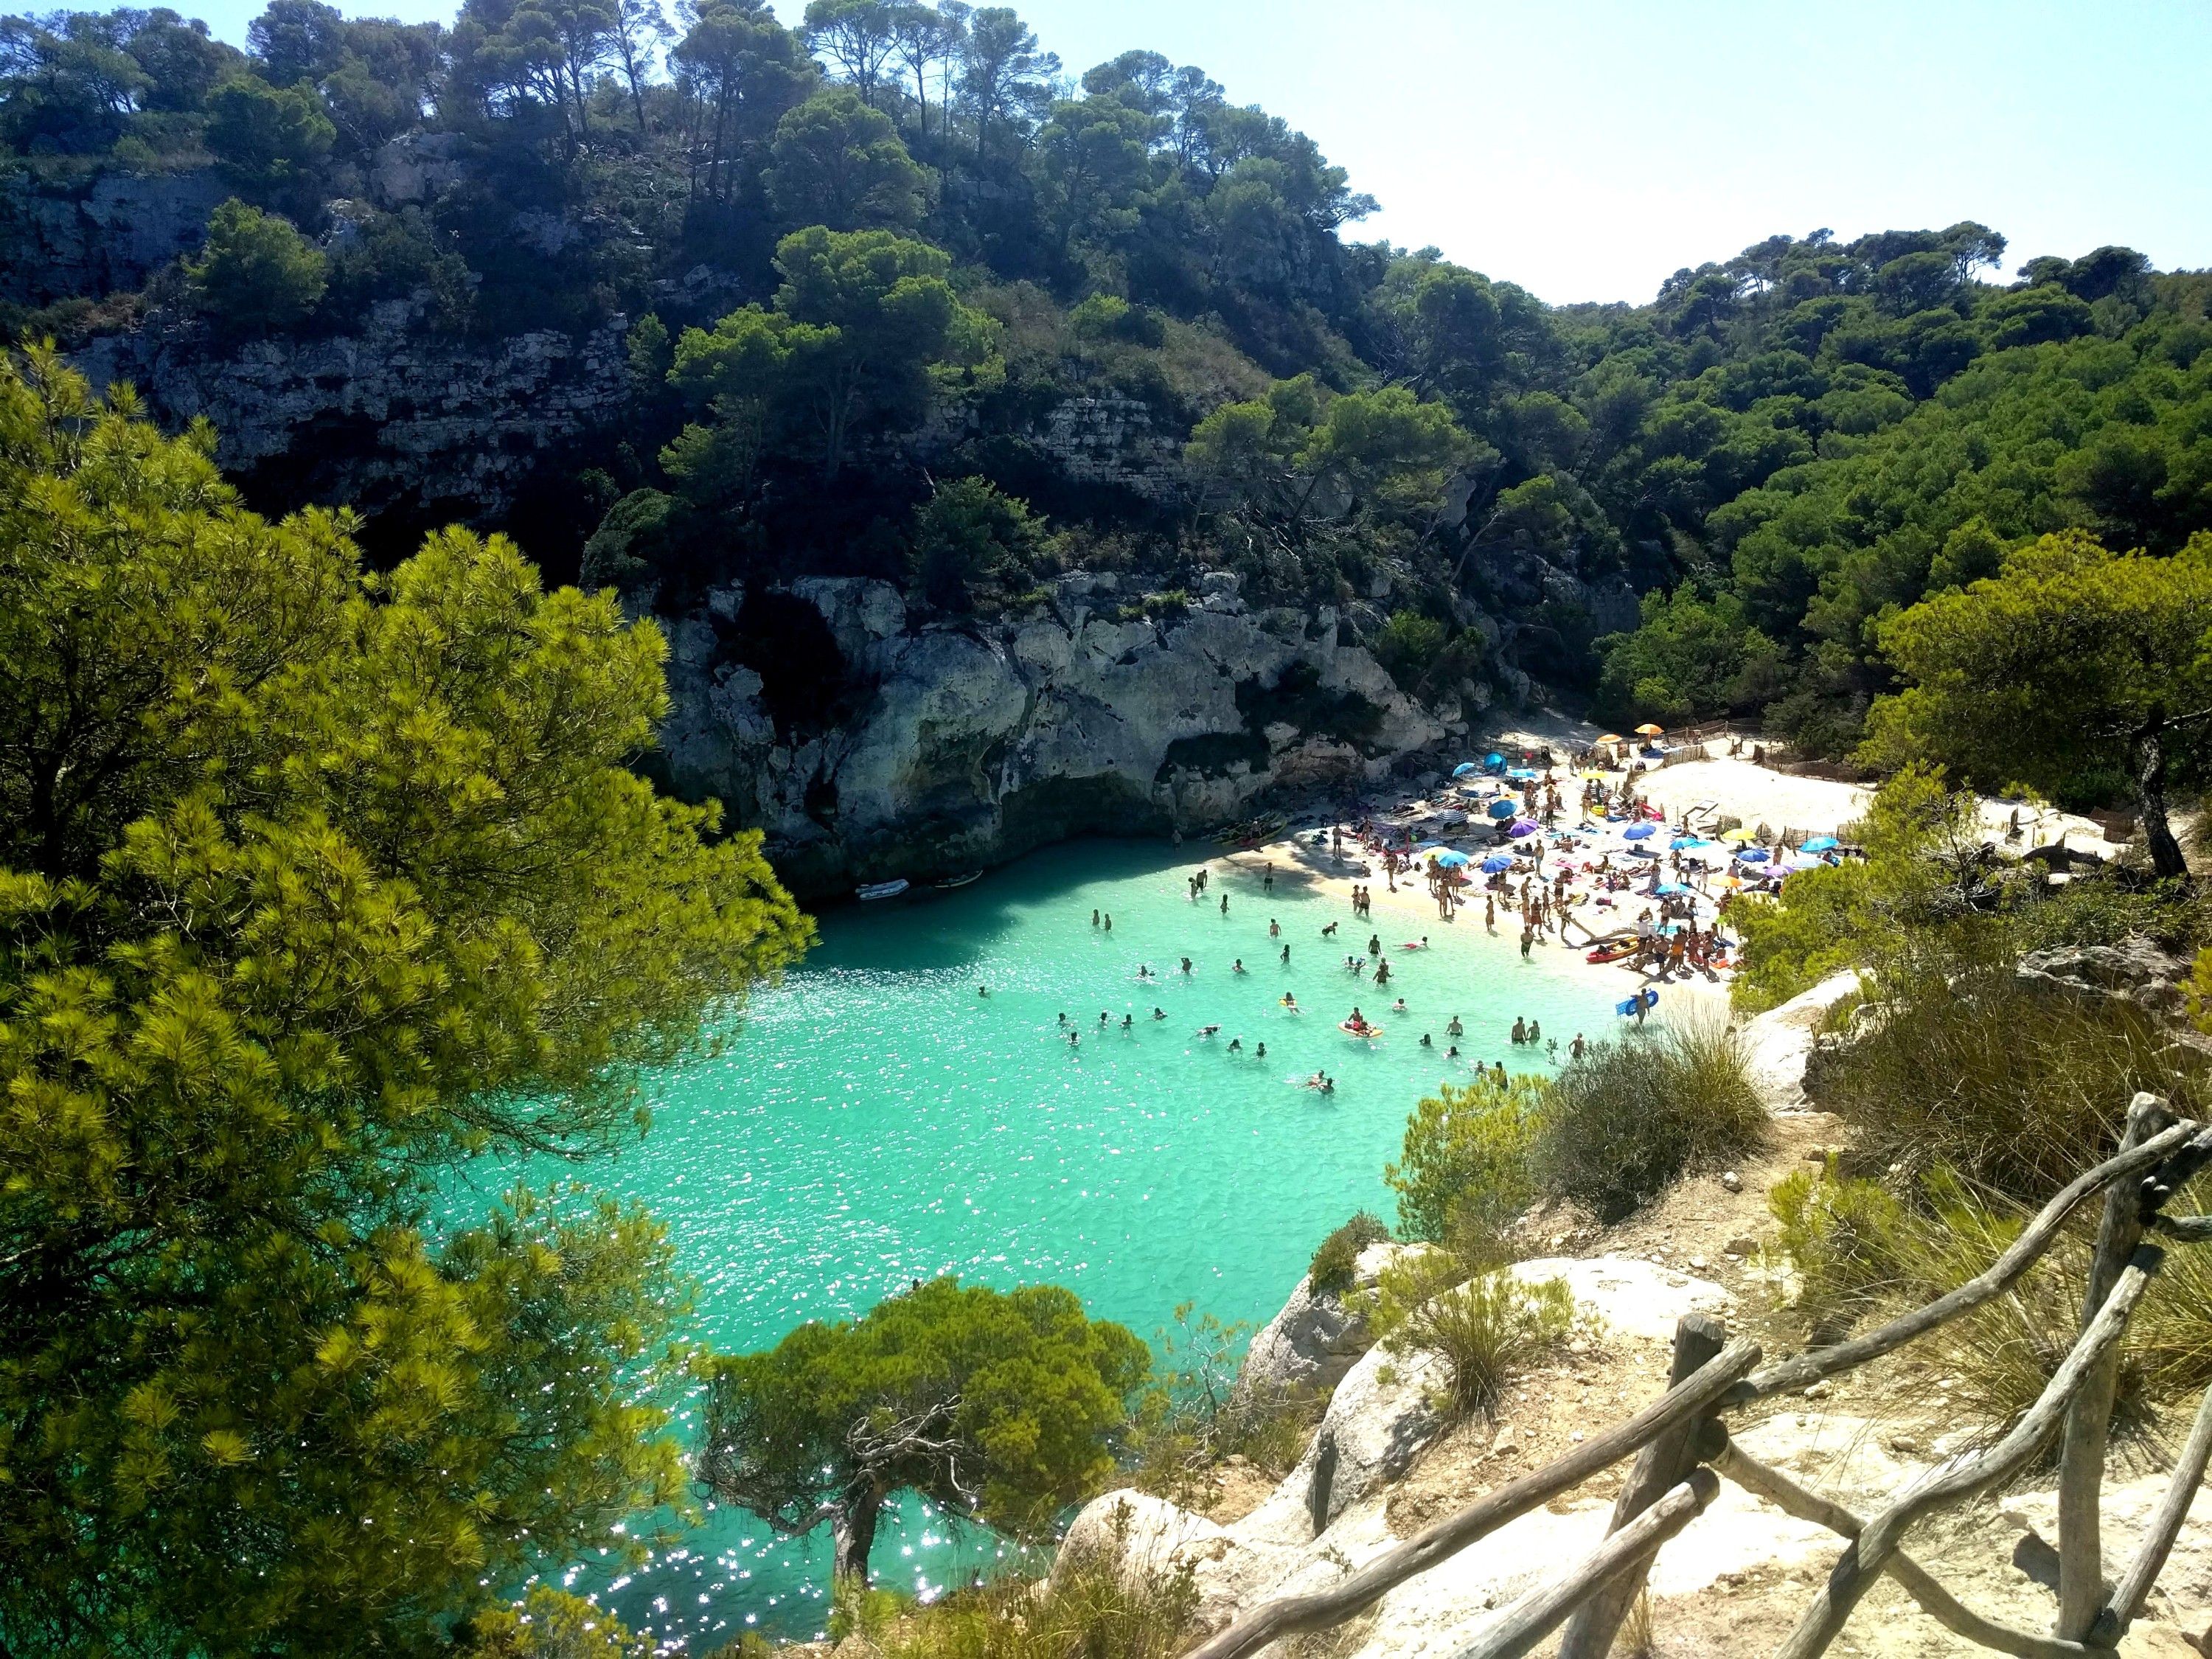 Caption: A photo of the secluded Macarelleta Beach from a high point, showing people sunbathing and swimming in the water. (Local Guide @MoniDi)